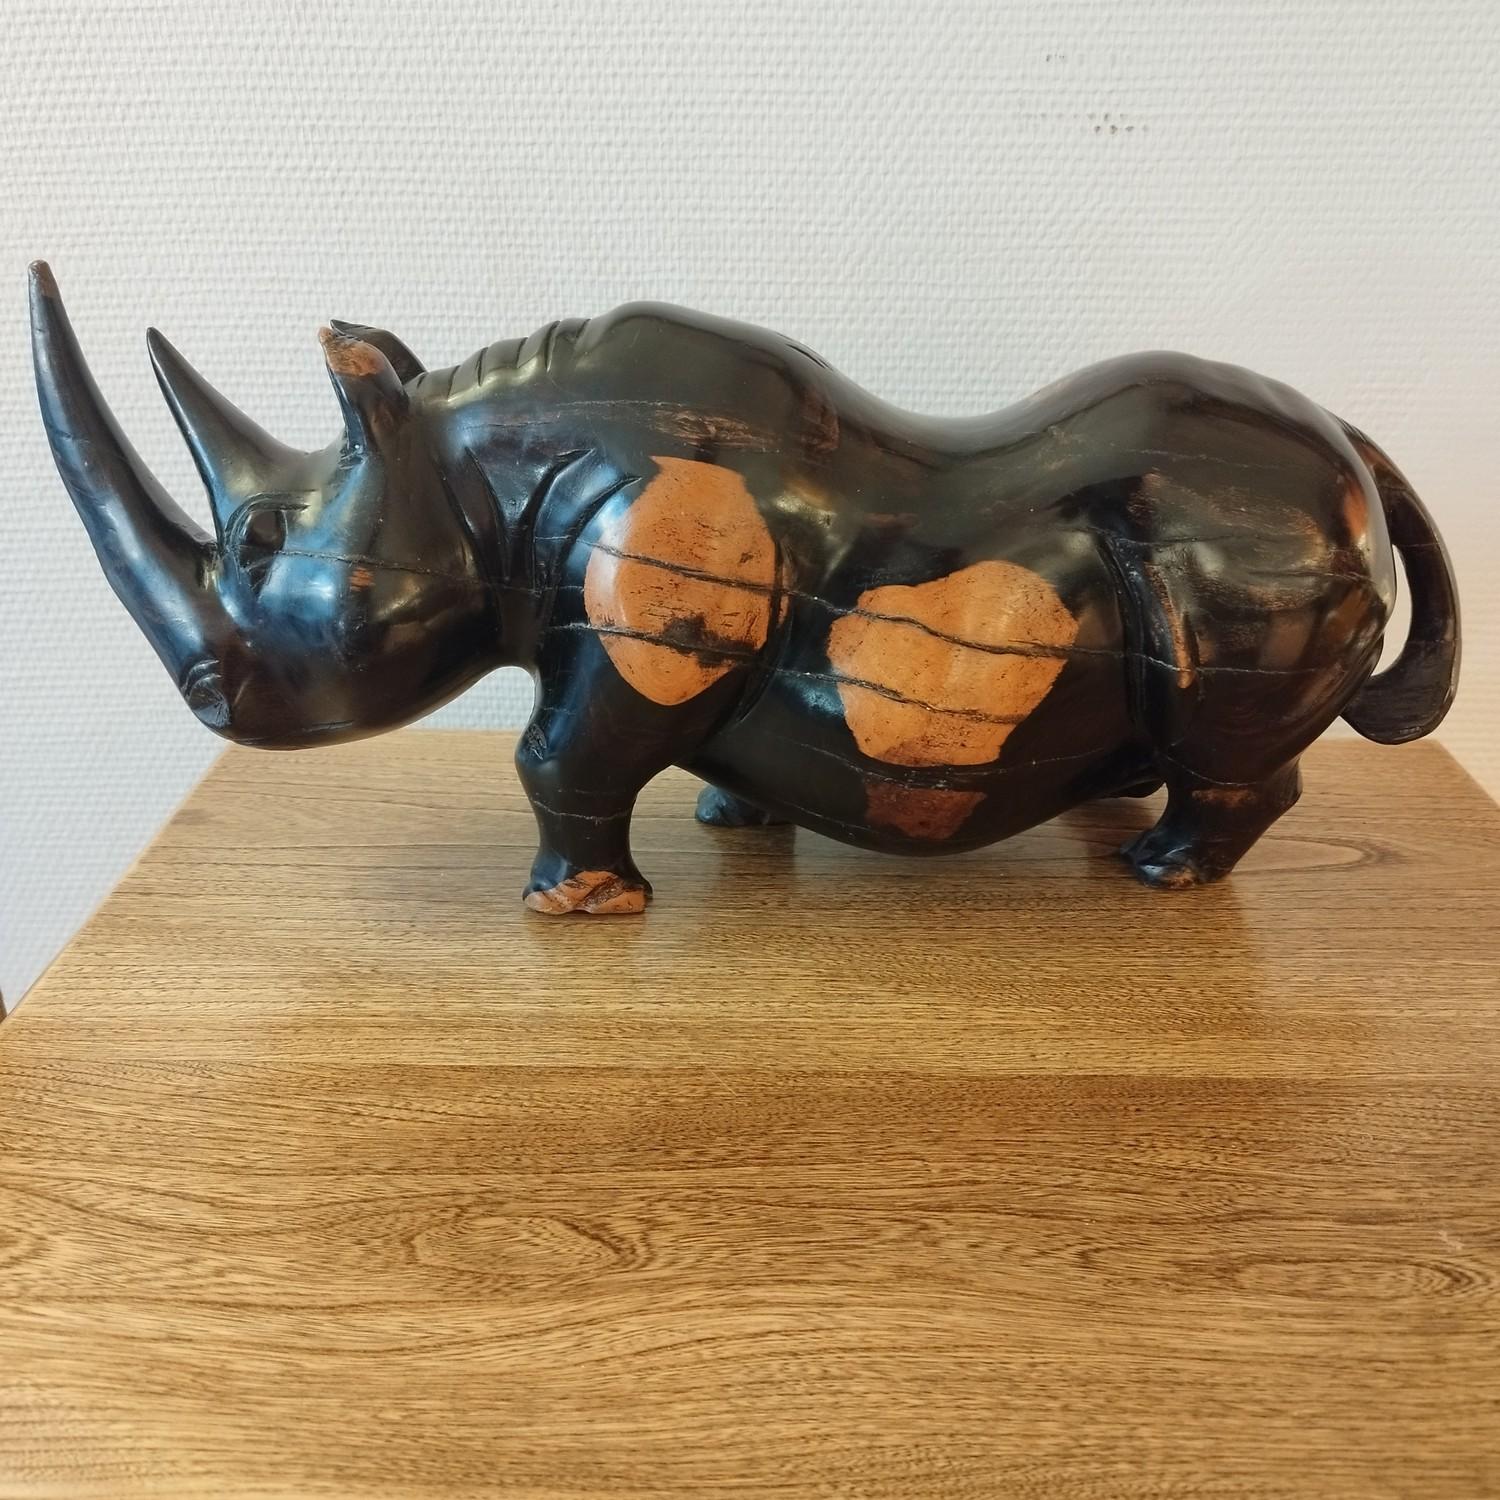 Great looking rhinoceros in wood. The tail is missing a small part (see photo).
Do not hesitate to contact me for a shipping quote.